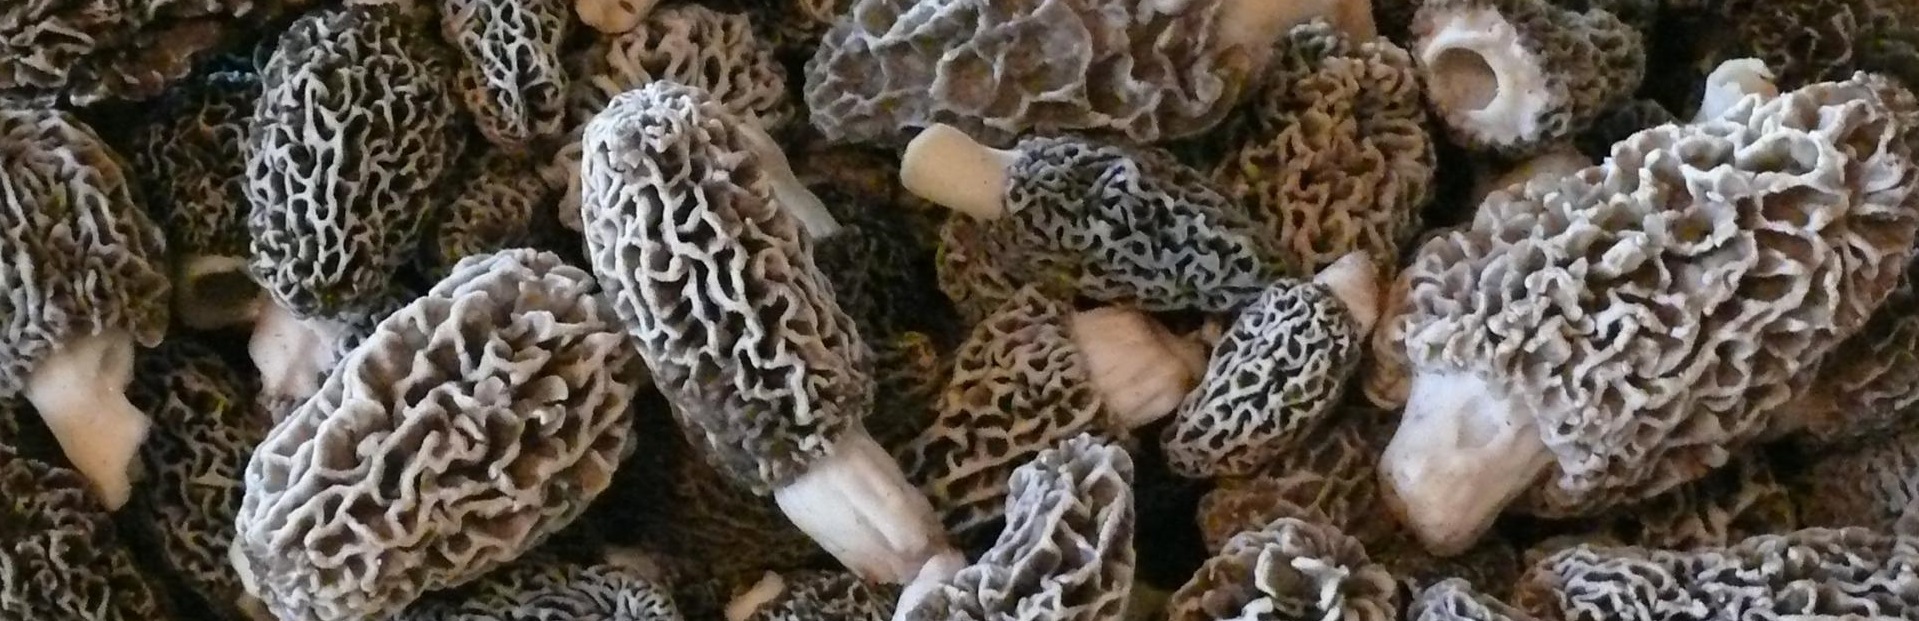 How to Dry Morel Mushrooms Without a Dehydrator